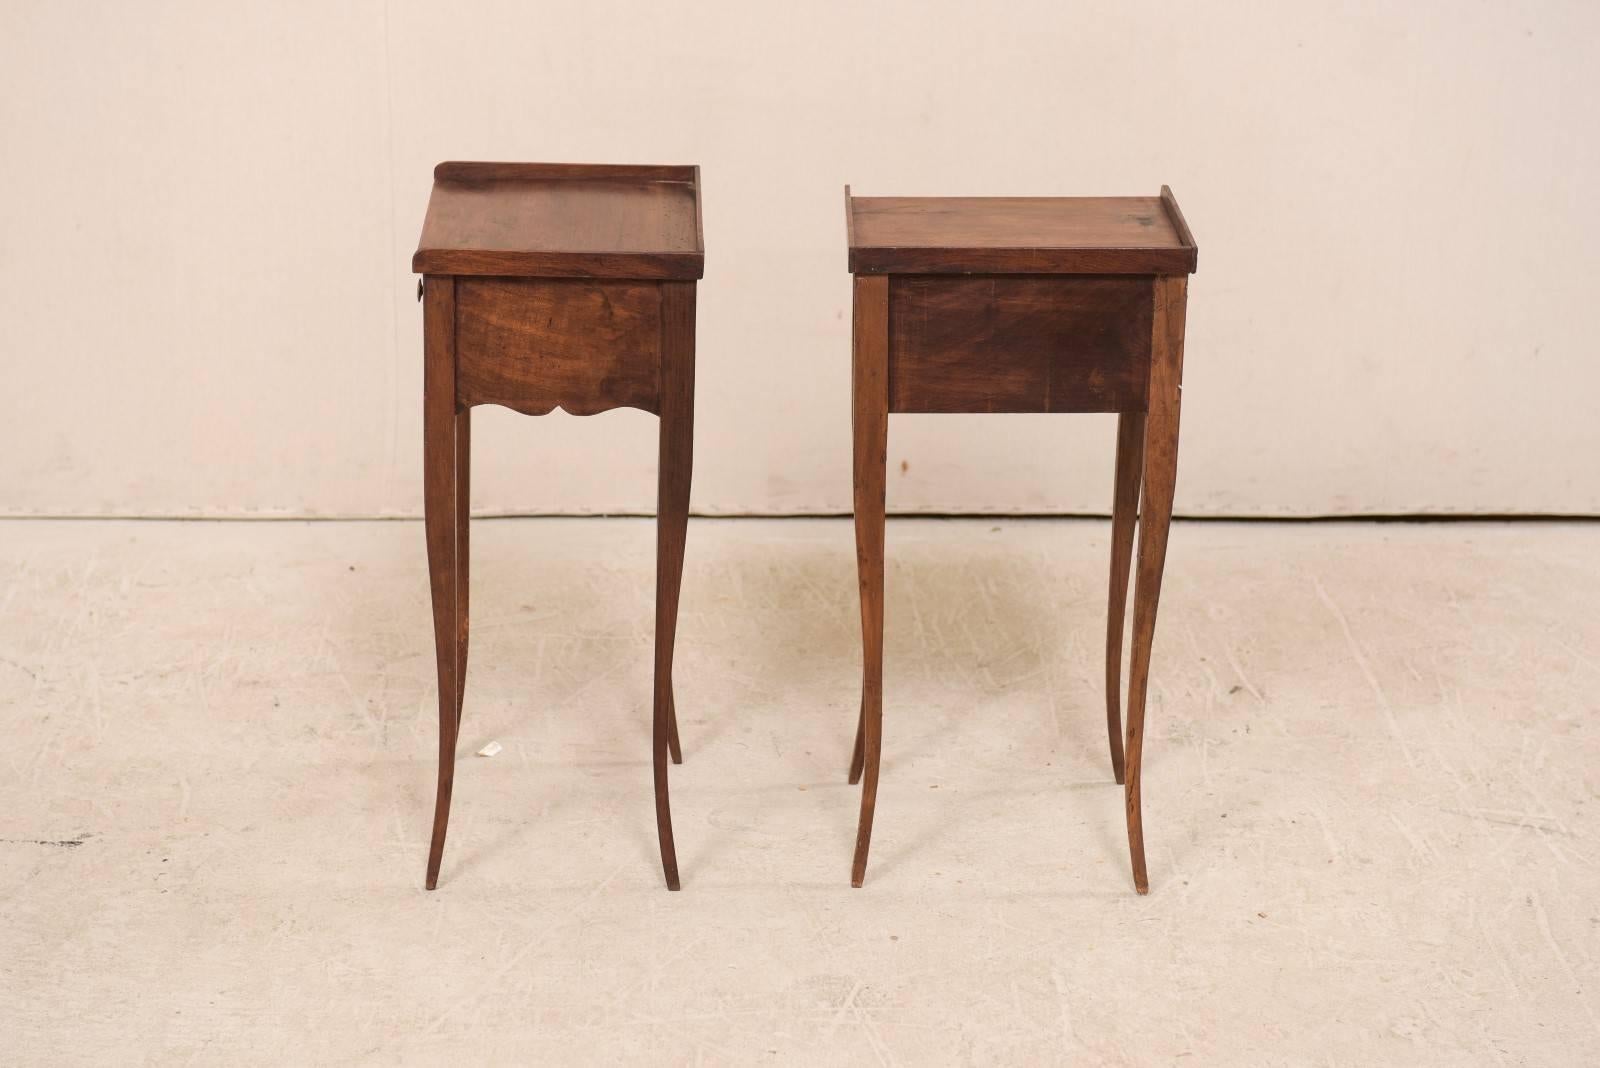 Wood Pair of Cute-Sized French Side Tables with Drawer and Nice Long Cabriole Legs